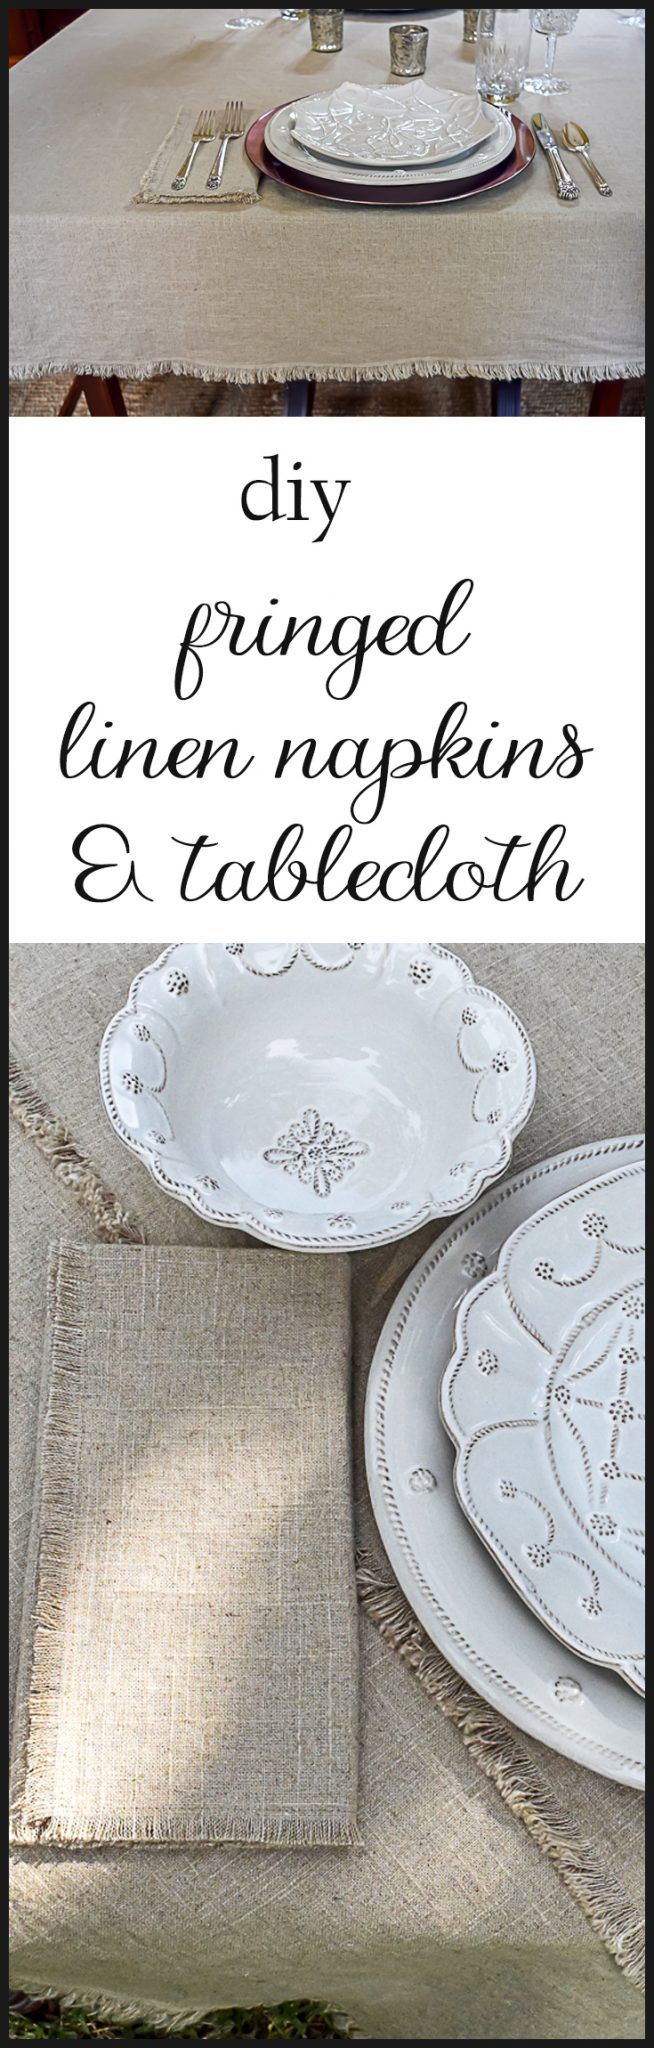 Make Fringed Napkins and Tablecloth-Easy DIY